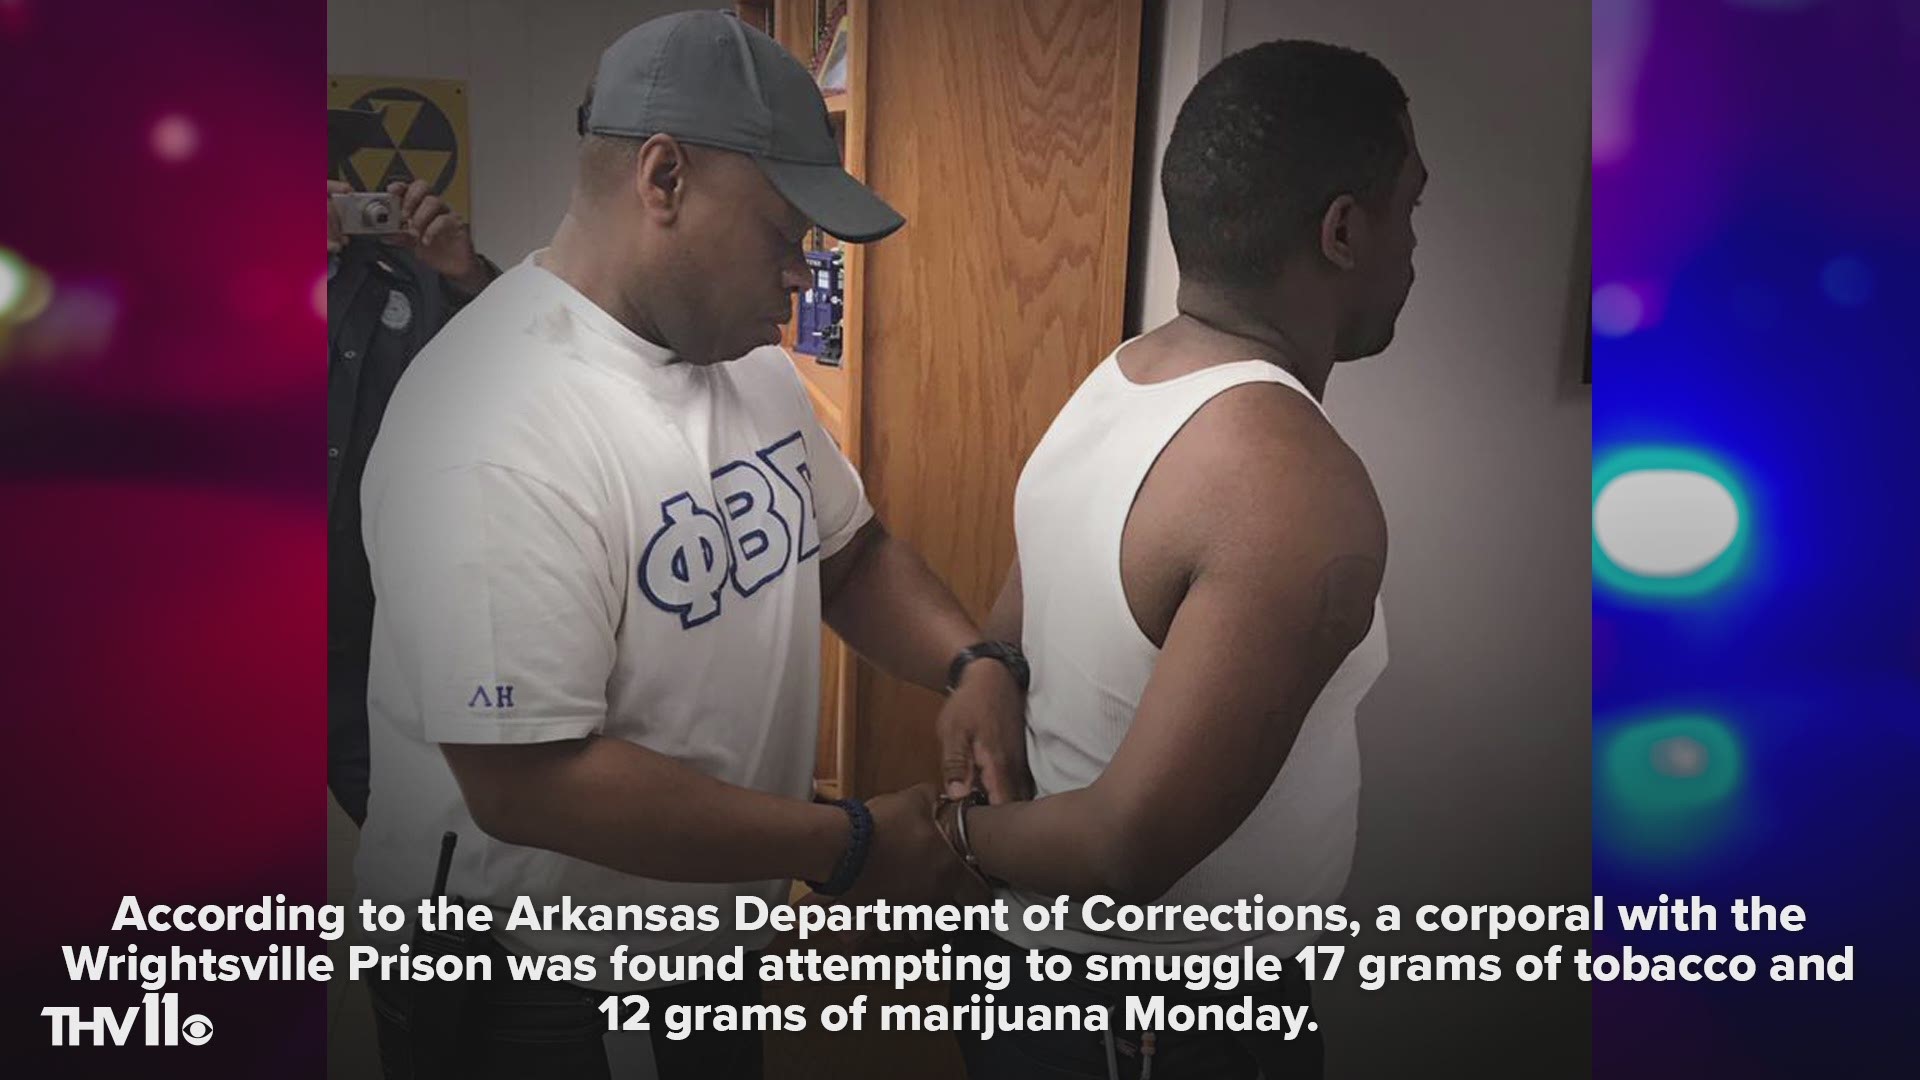 According to a post on Arkansas Department of Corrections Facebook, a corporal has been arrested for smuggling tobacco and marijuana.